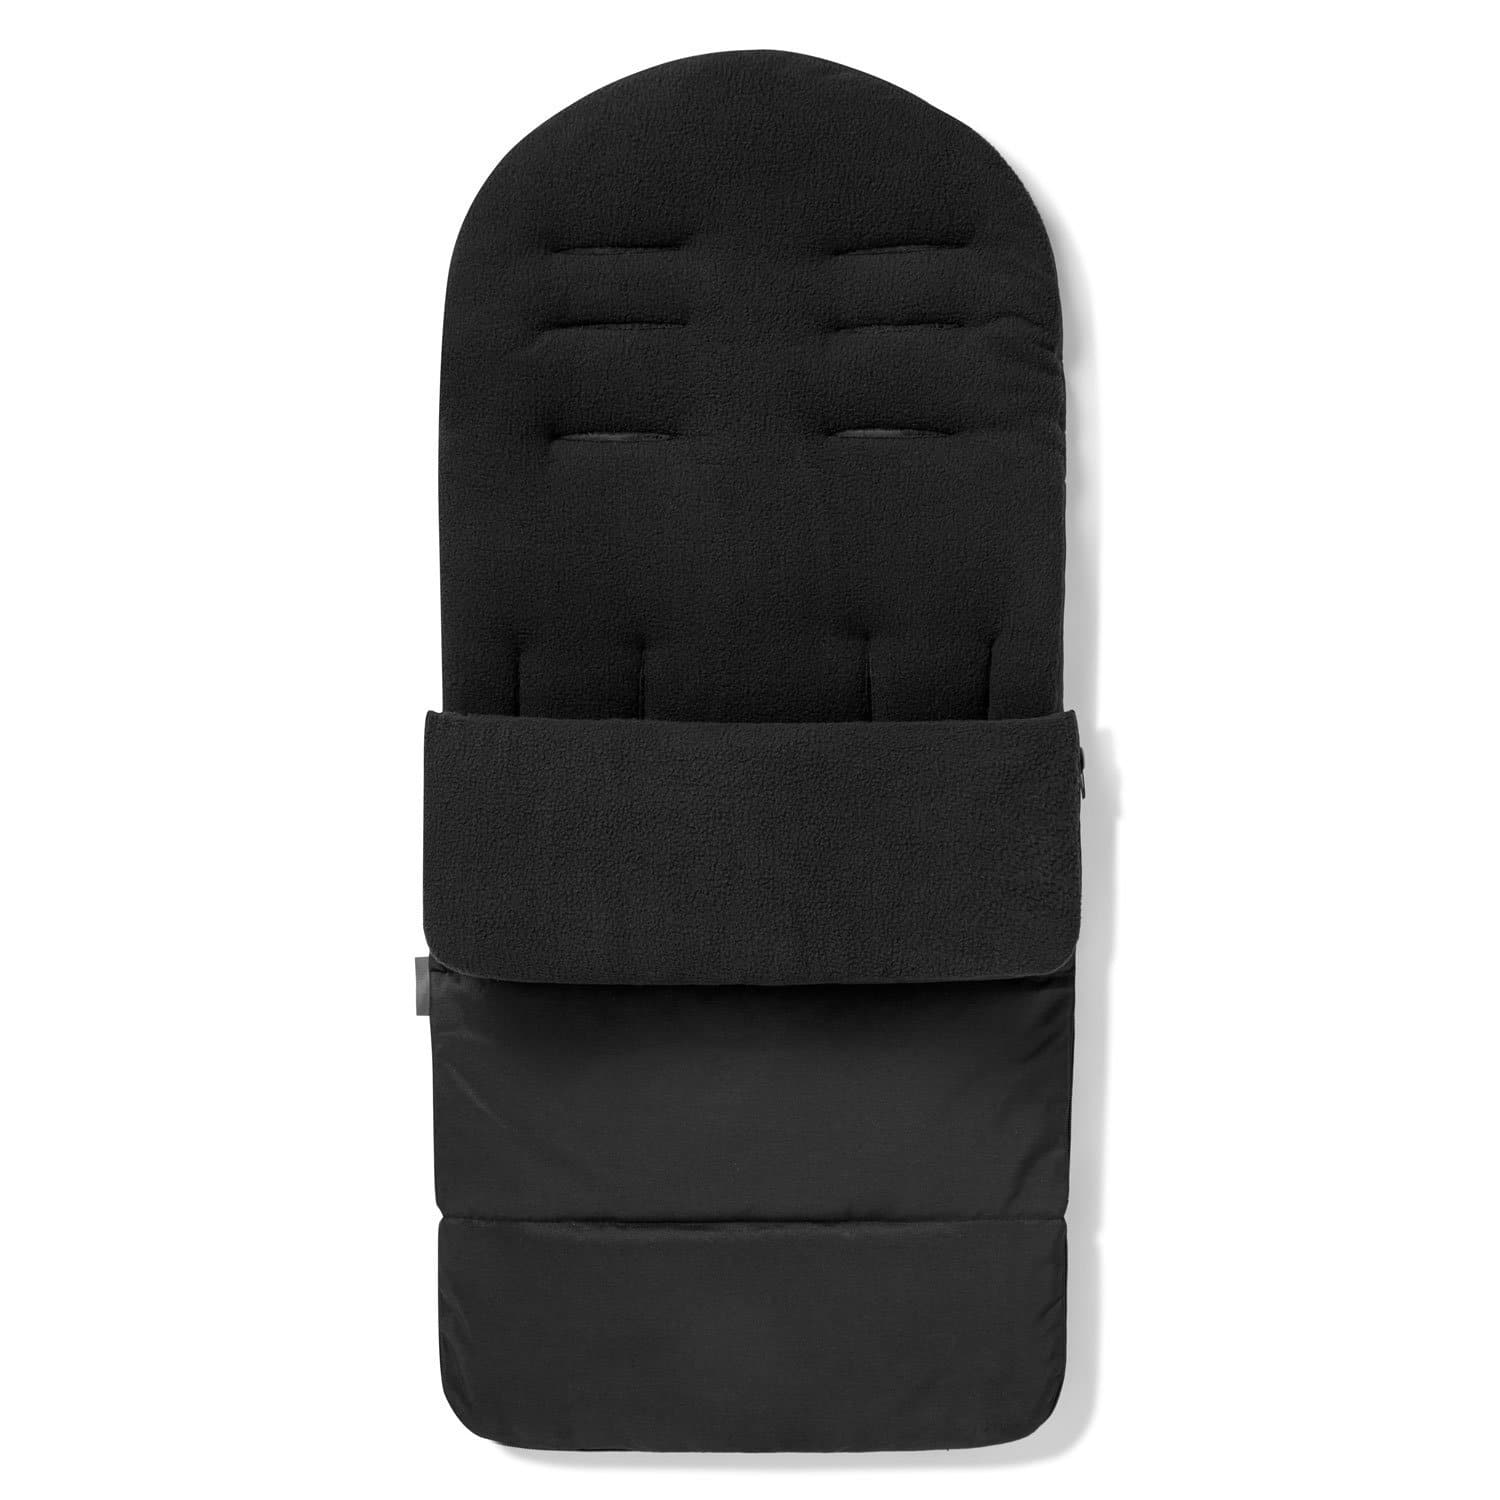 Premium Footmuff / Cosy Toes Compatible with Teutonia - Black Jack / Fits All Models | For Your Little One